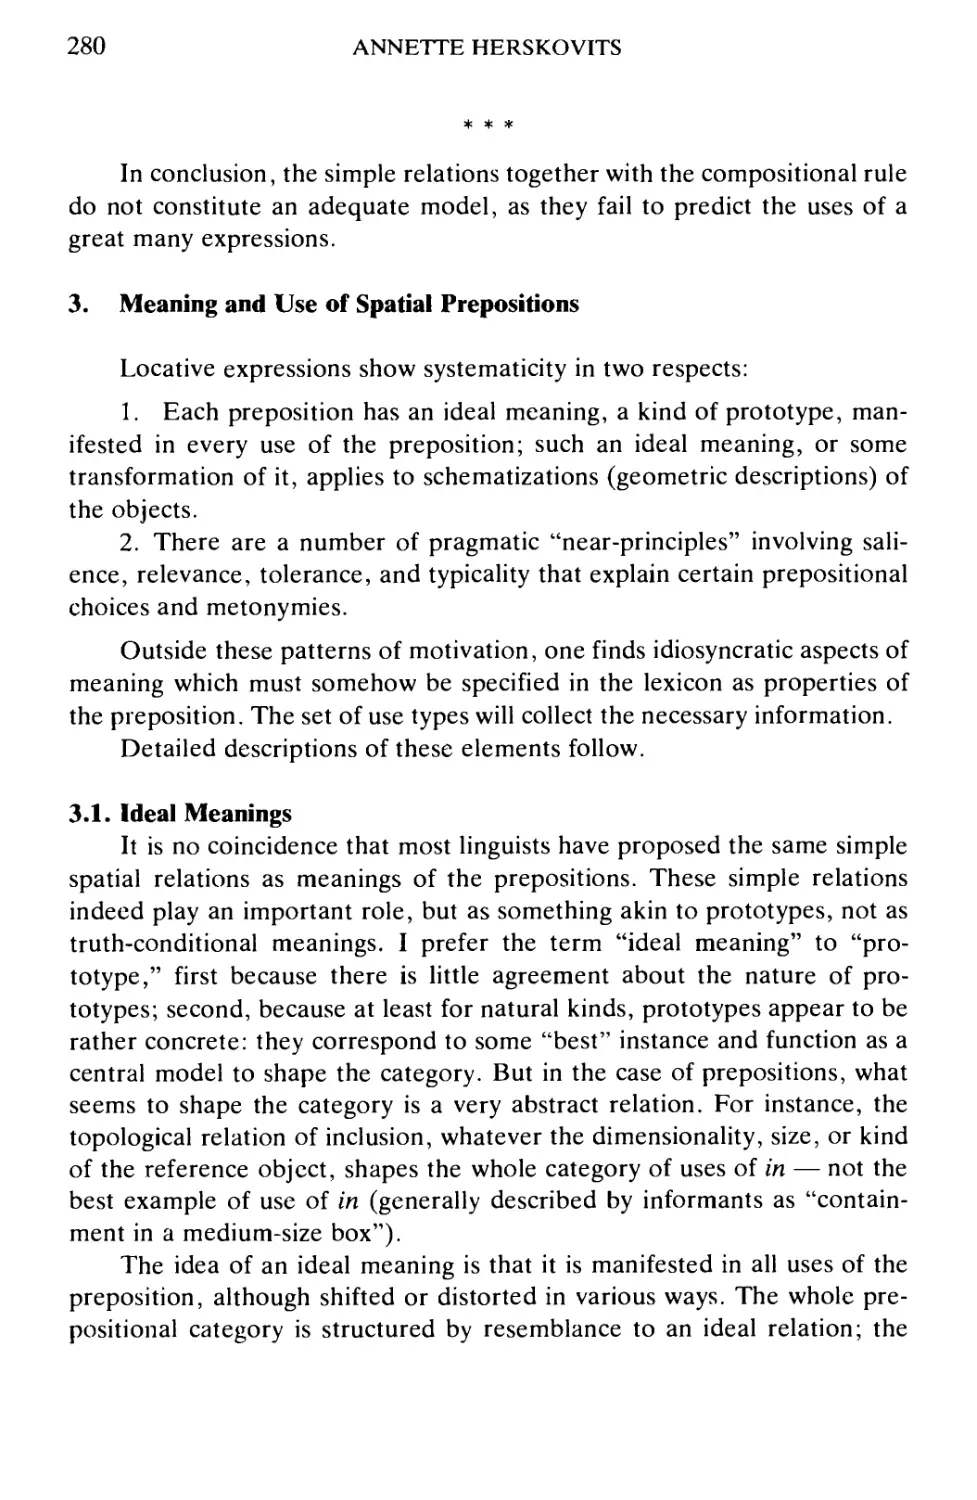 3. Meaning and Use of Spatial Prepositions